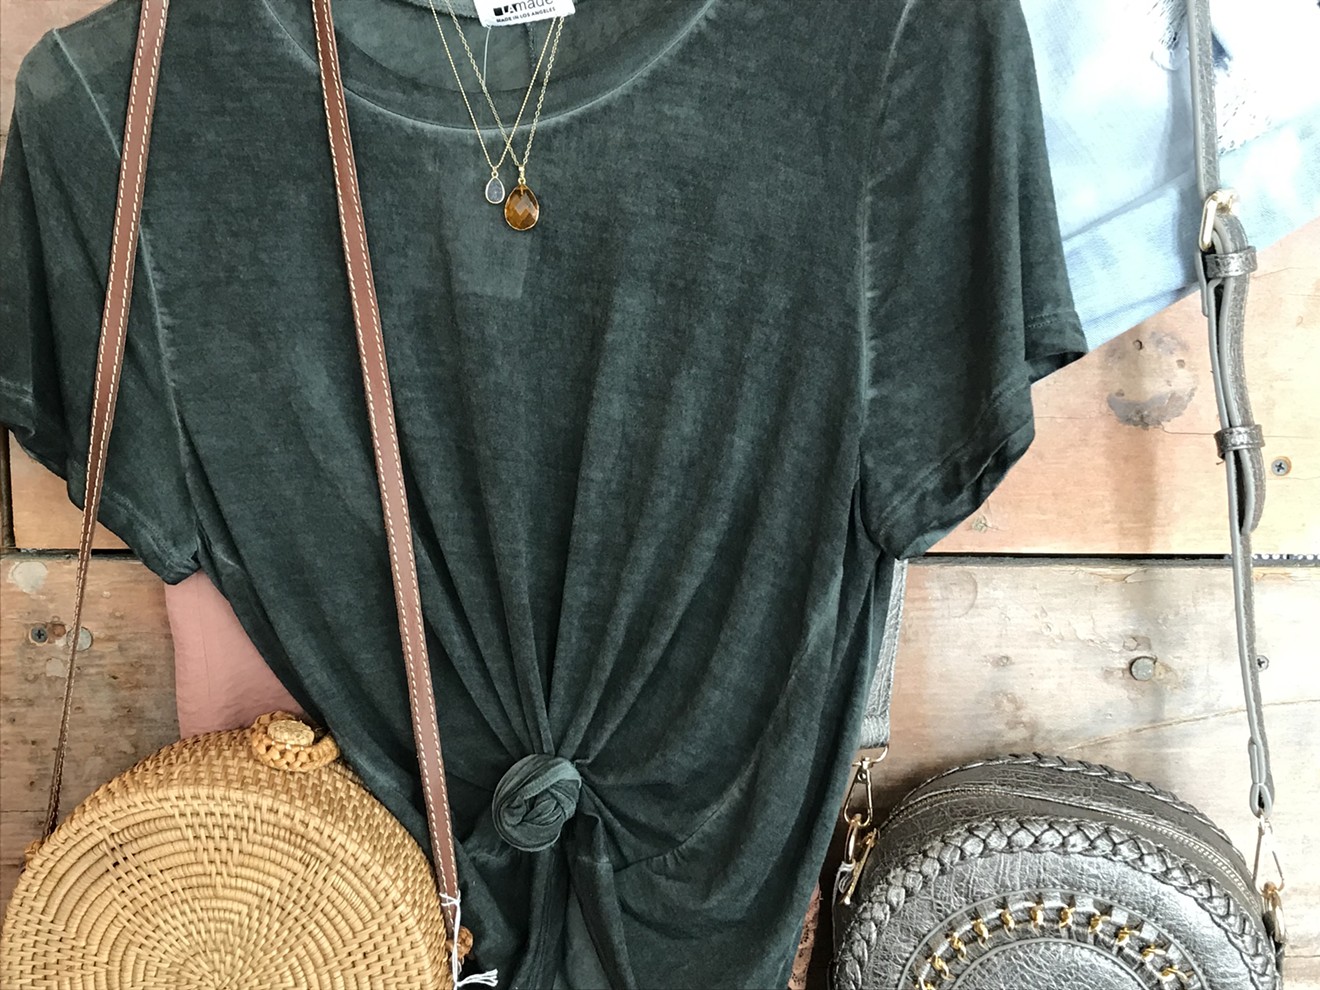 Clothing and accessories we spotted at Bunky Boutique.